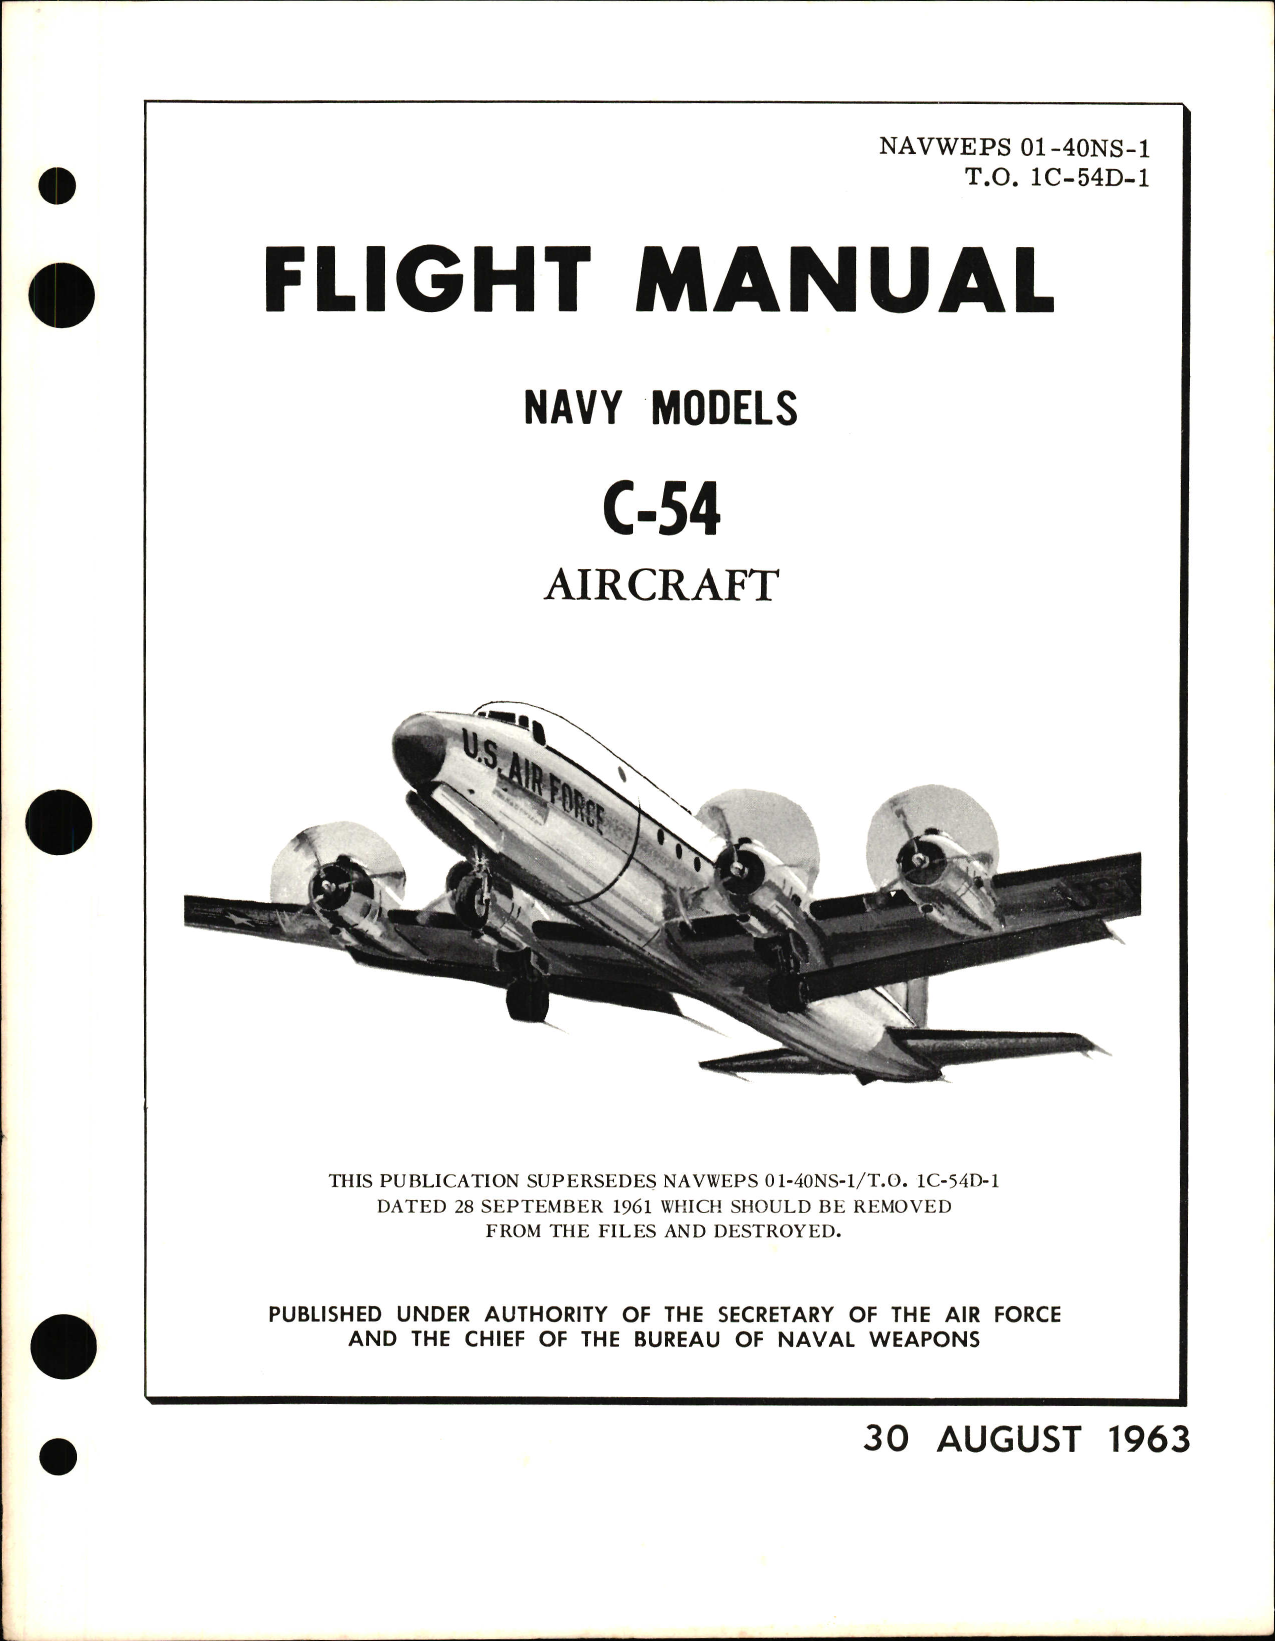 Sample page 1 from AirCorps Library document: Flight Manual for C-54